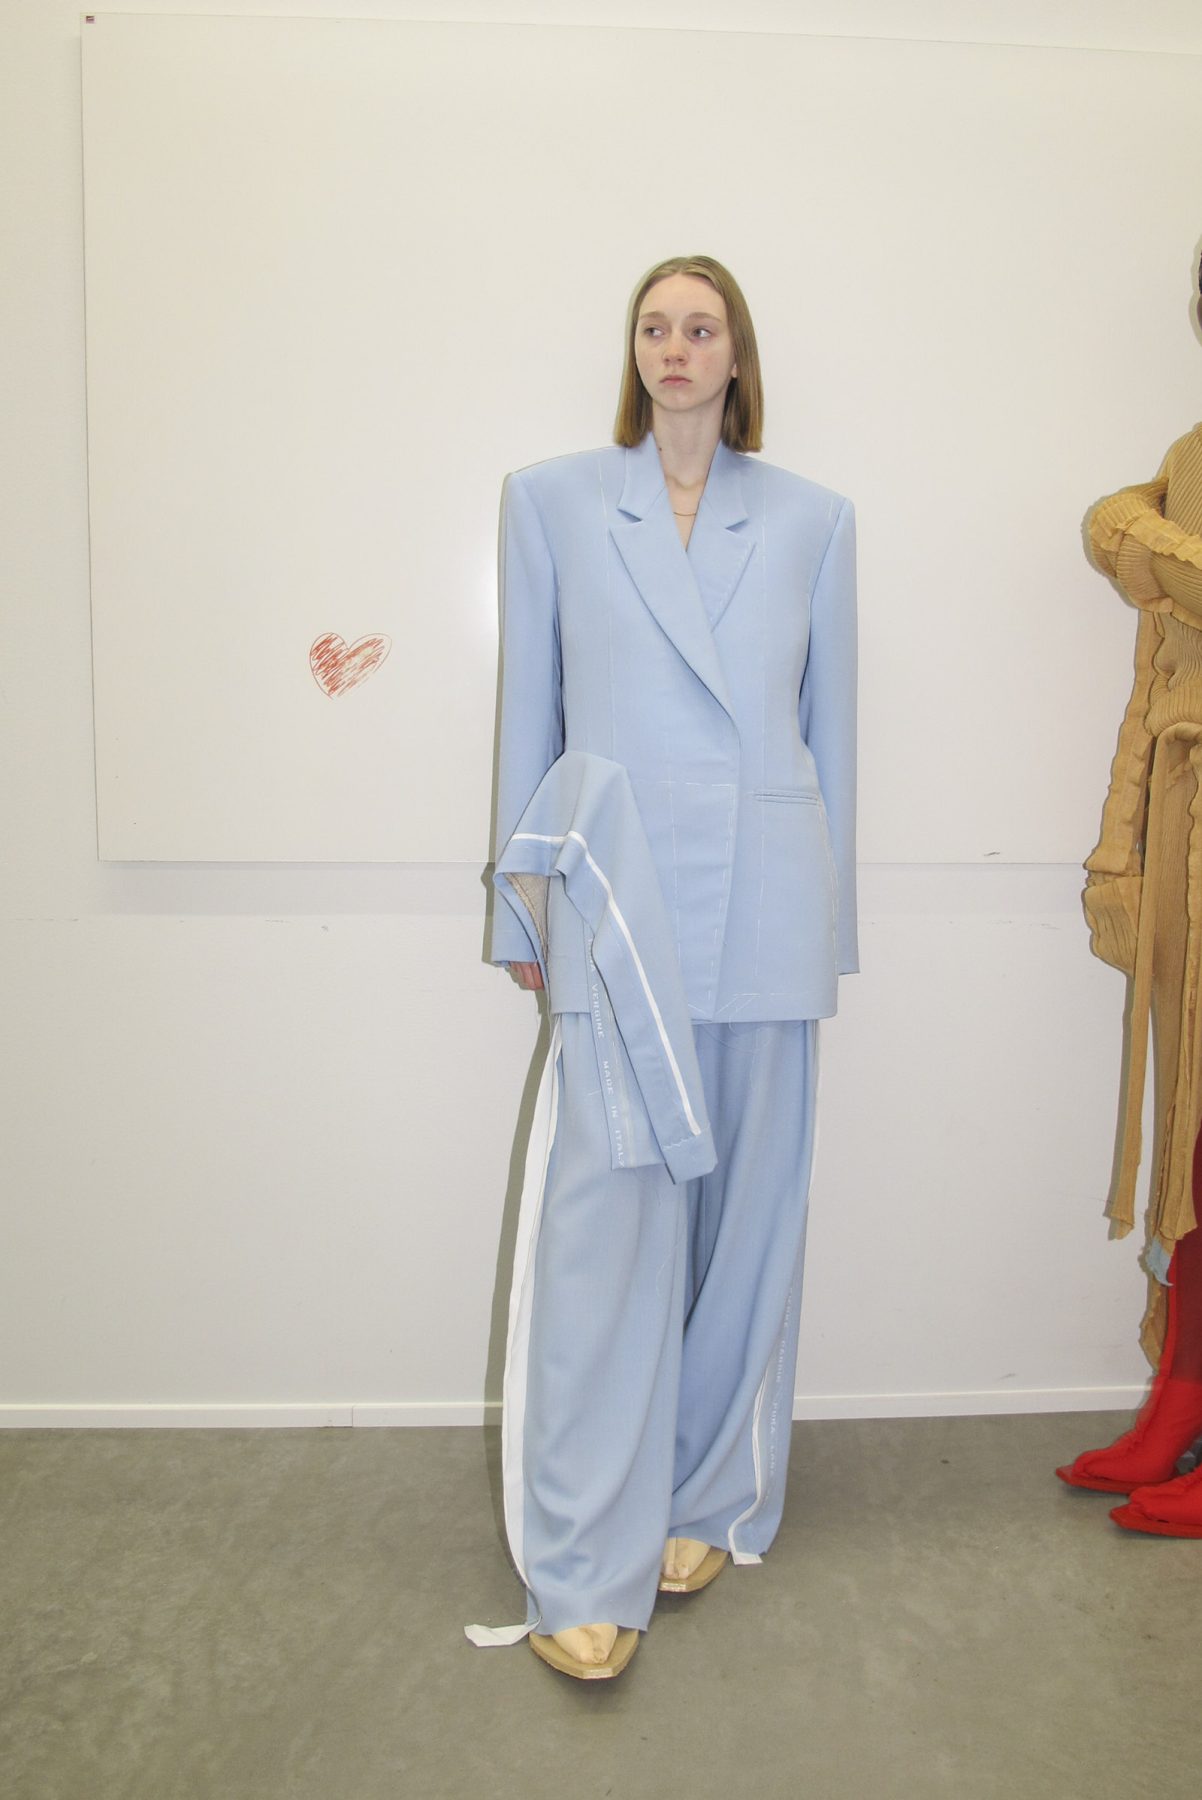 Model wearing light blue oversized tailored suit outfit